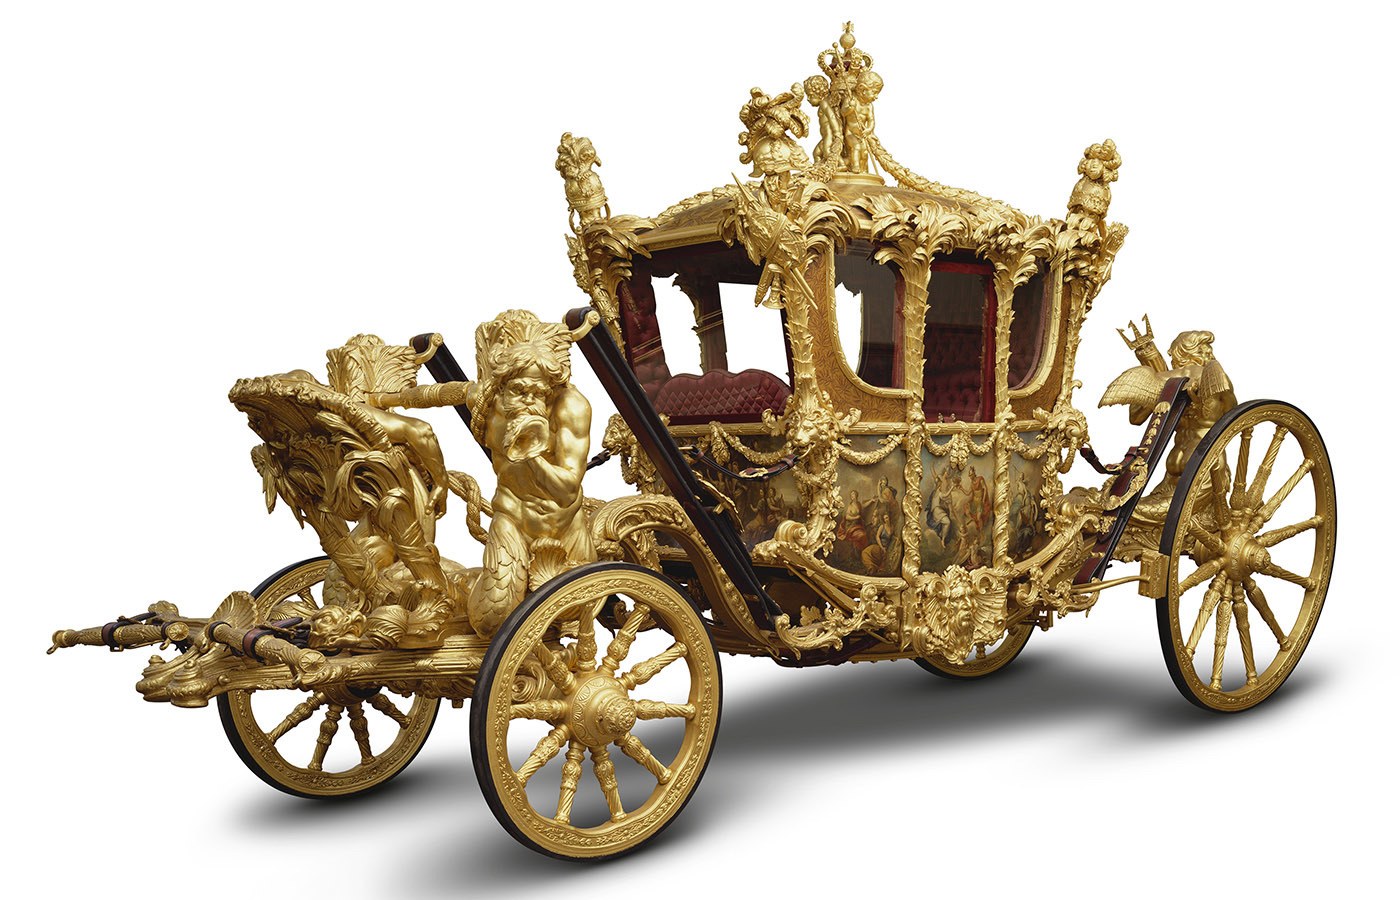 The Gold State Coach will carry the newly-crowned King and Queen following the ceremony.